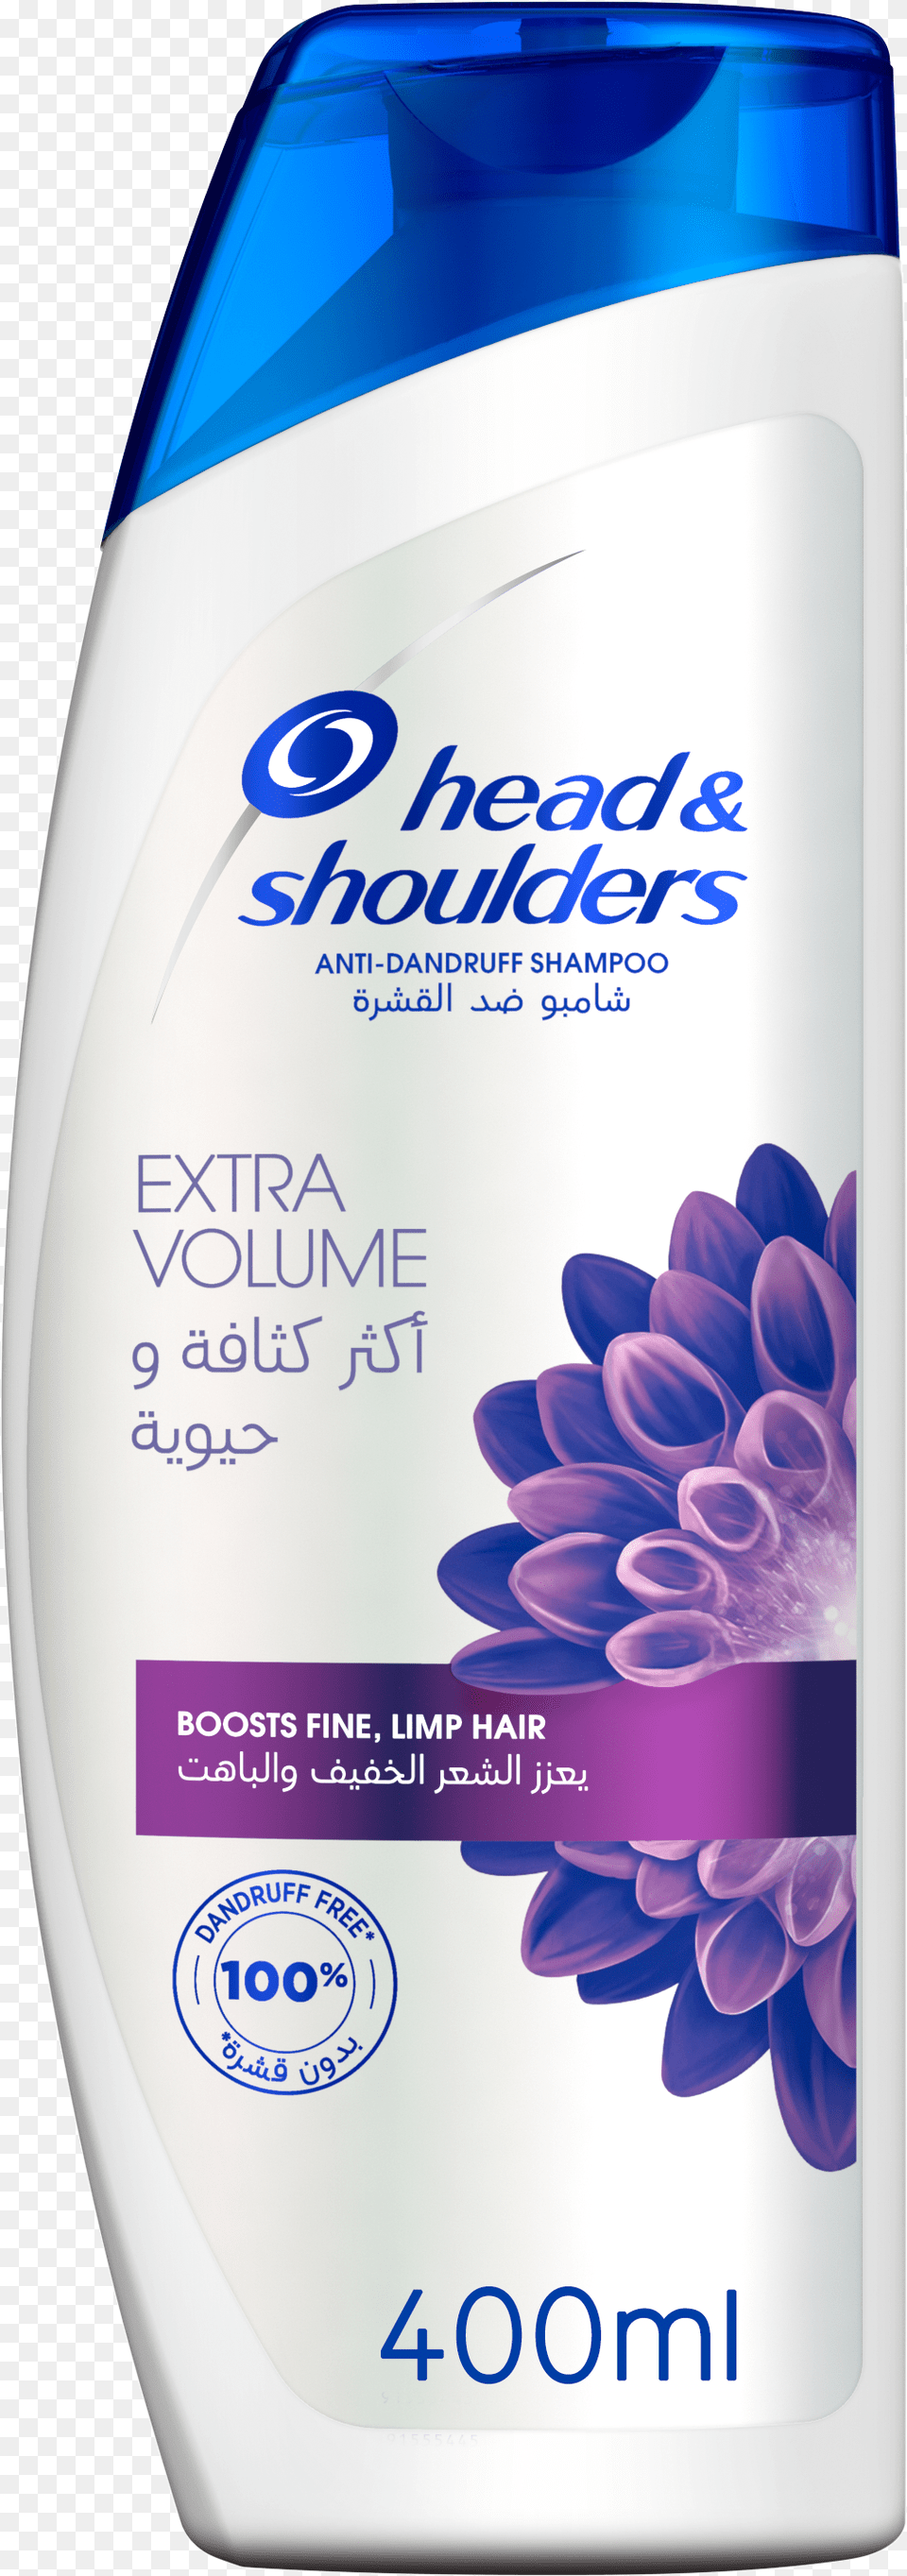 Head And Shoulders Shampoo, Bottle, Lotion, Can, Tin Free Png Download